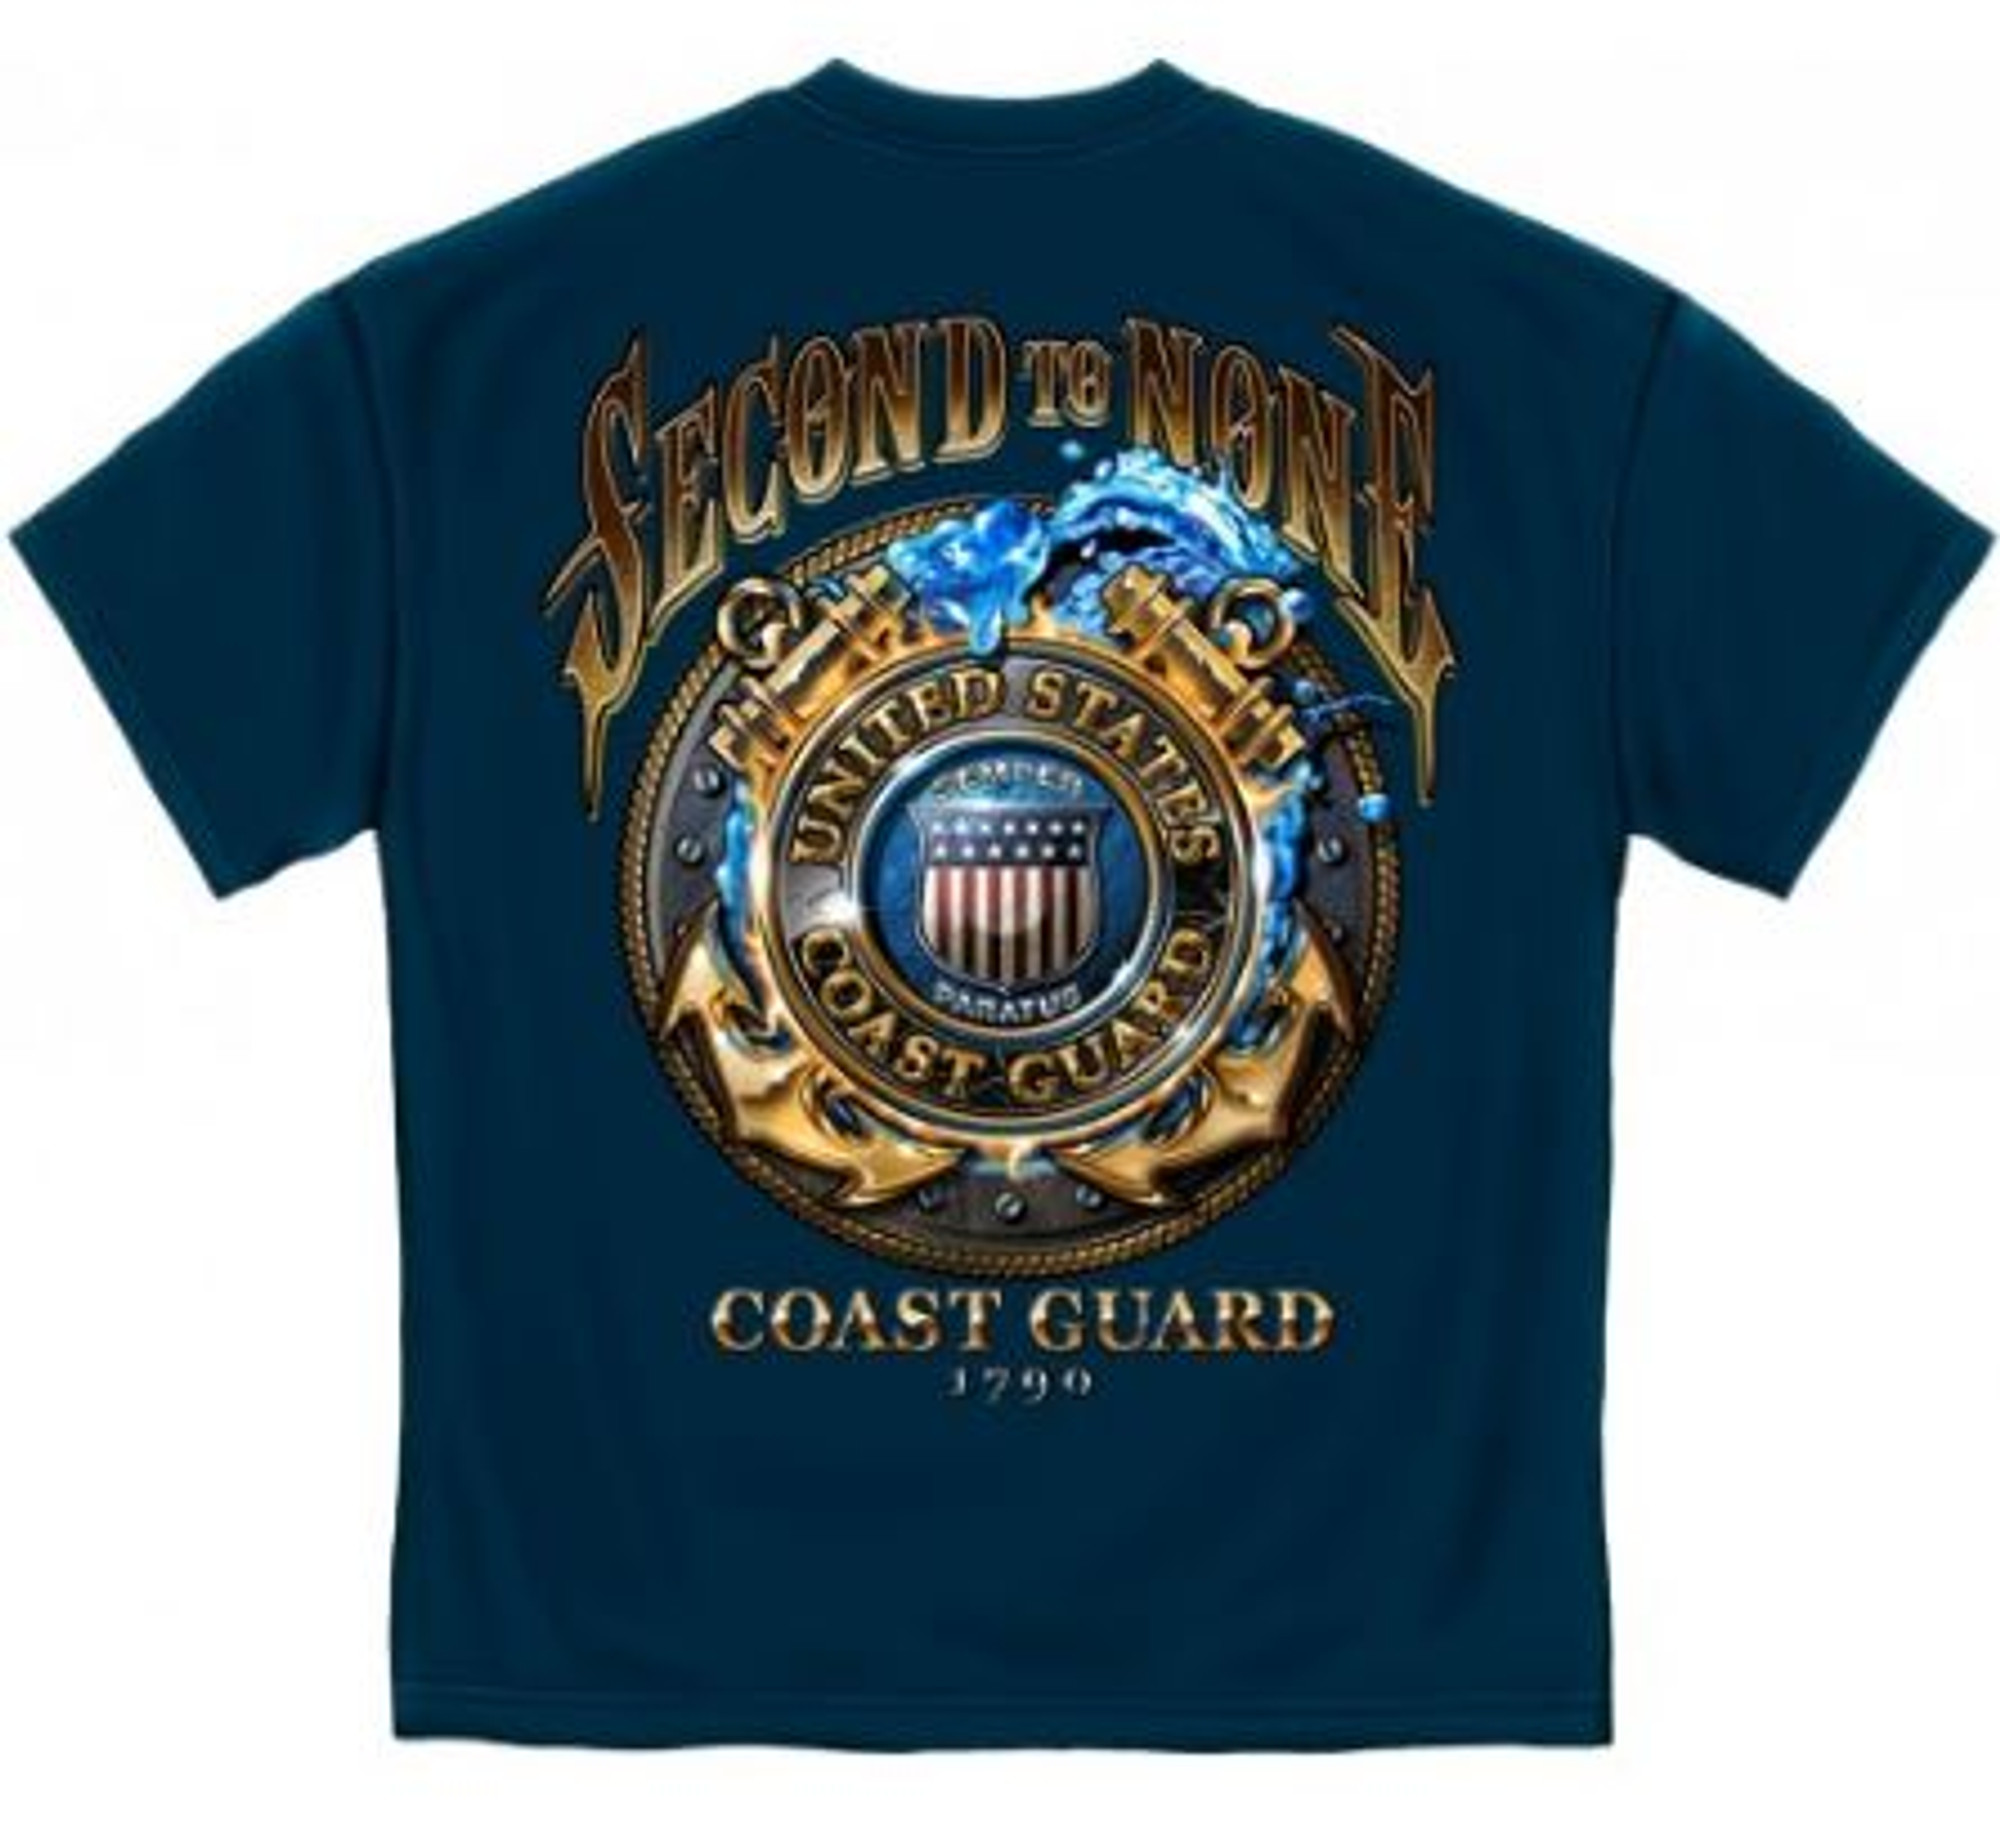 US Coast Guard "Second To None" T-Shirt